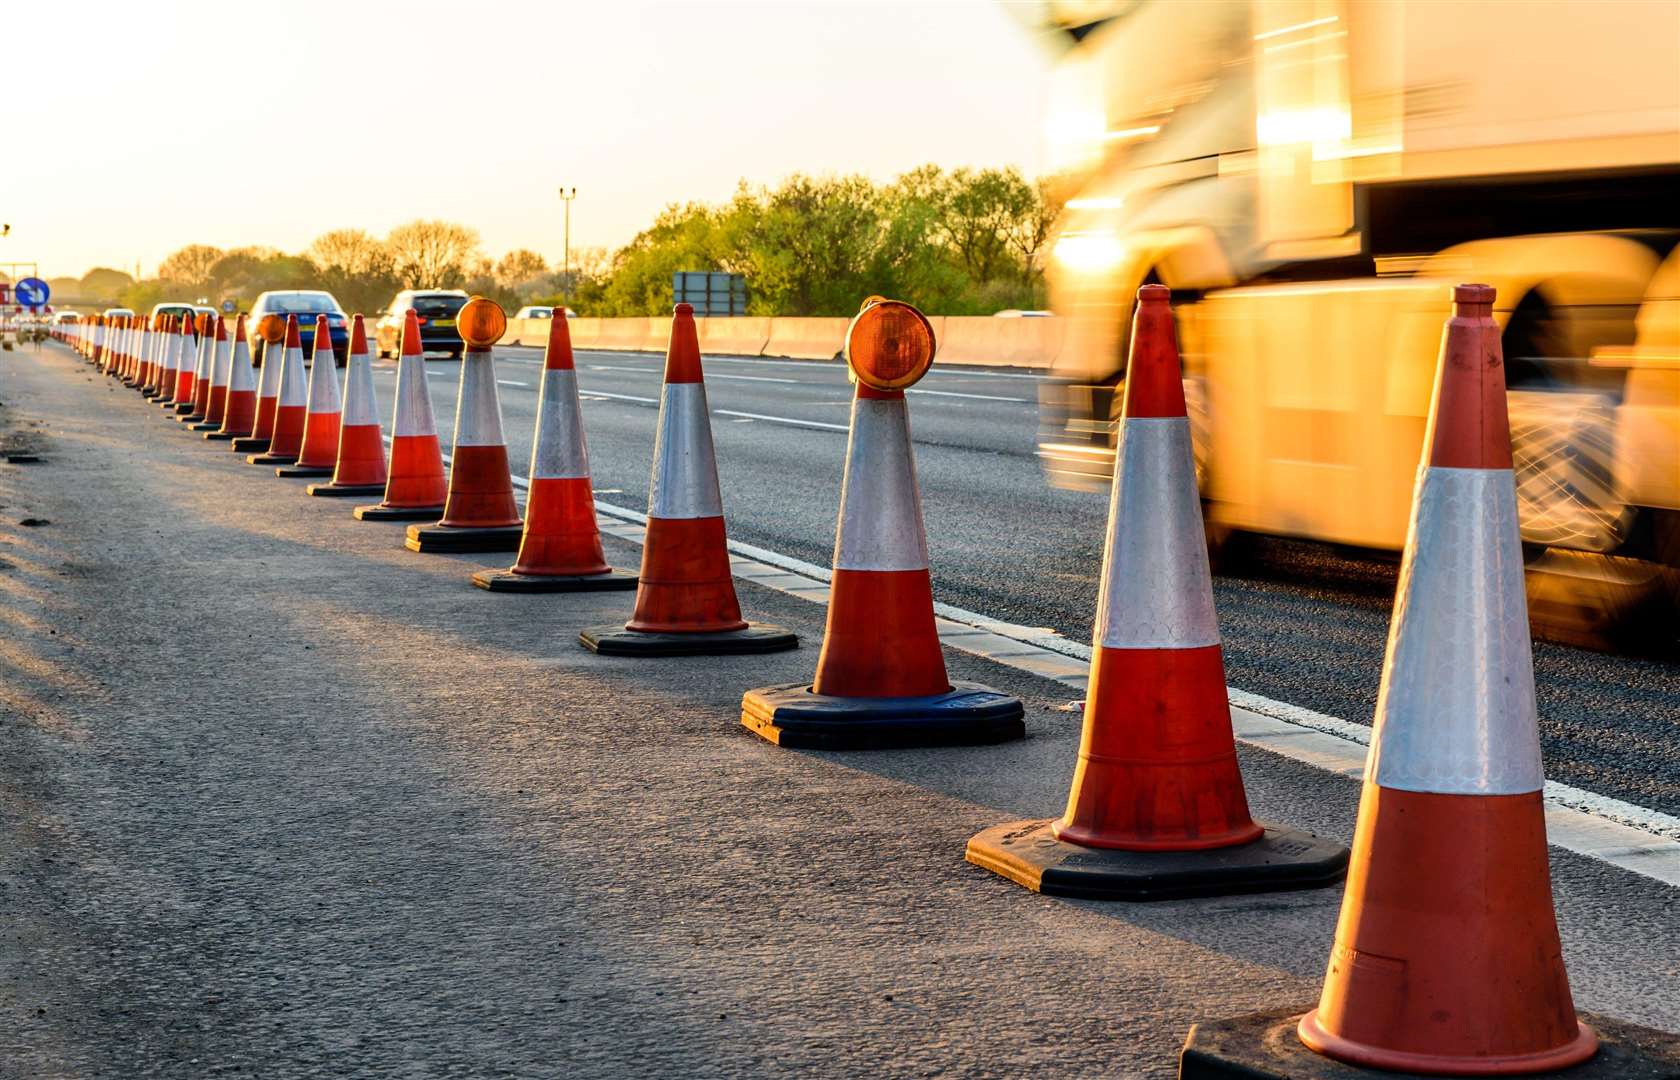 Motorists should look out for the roadworks